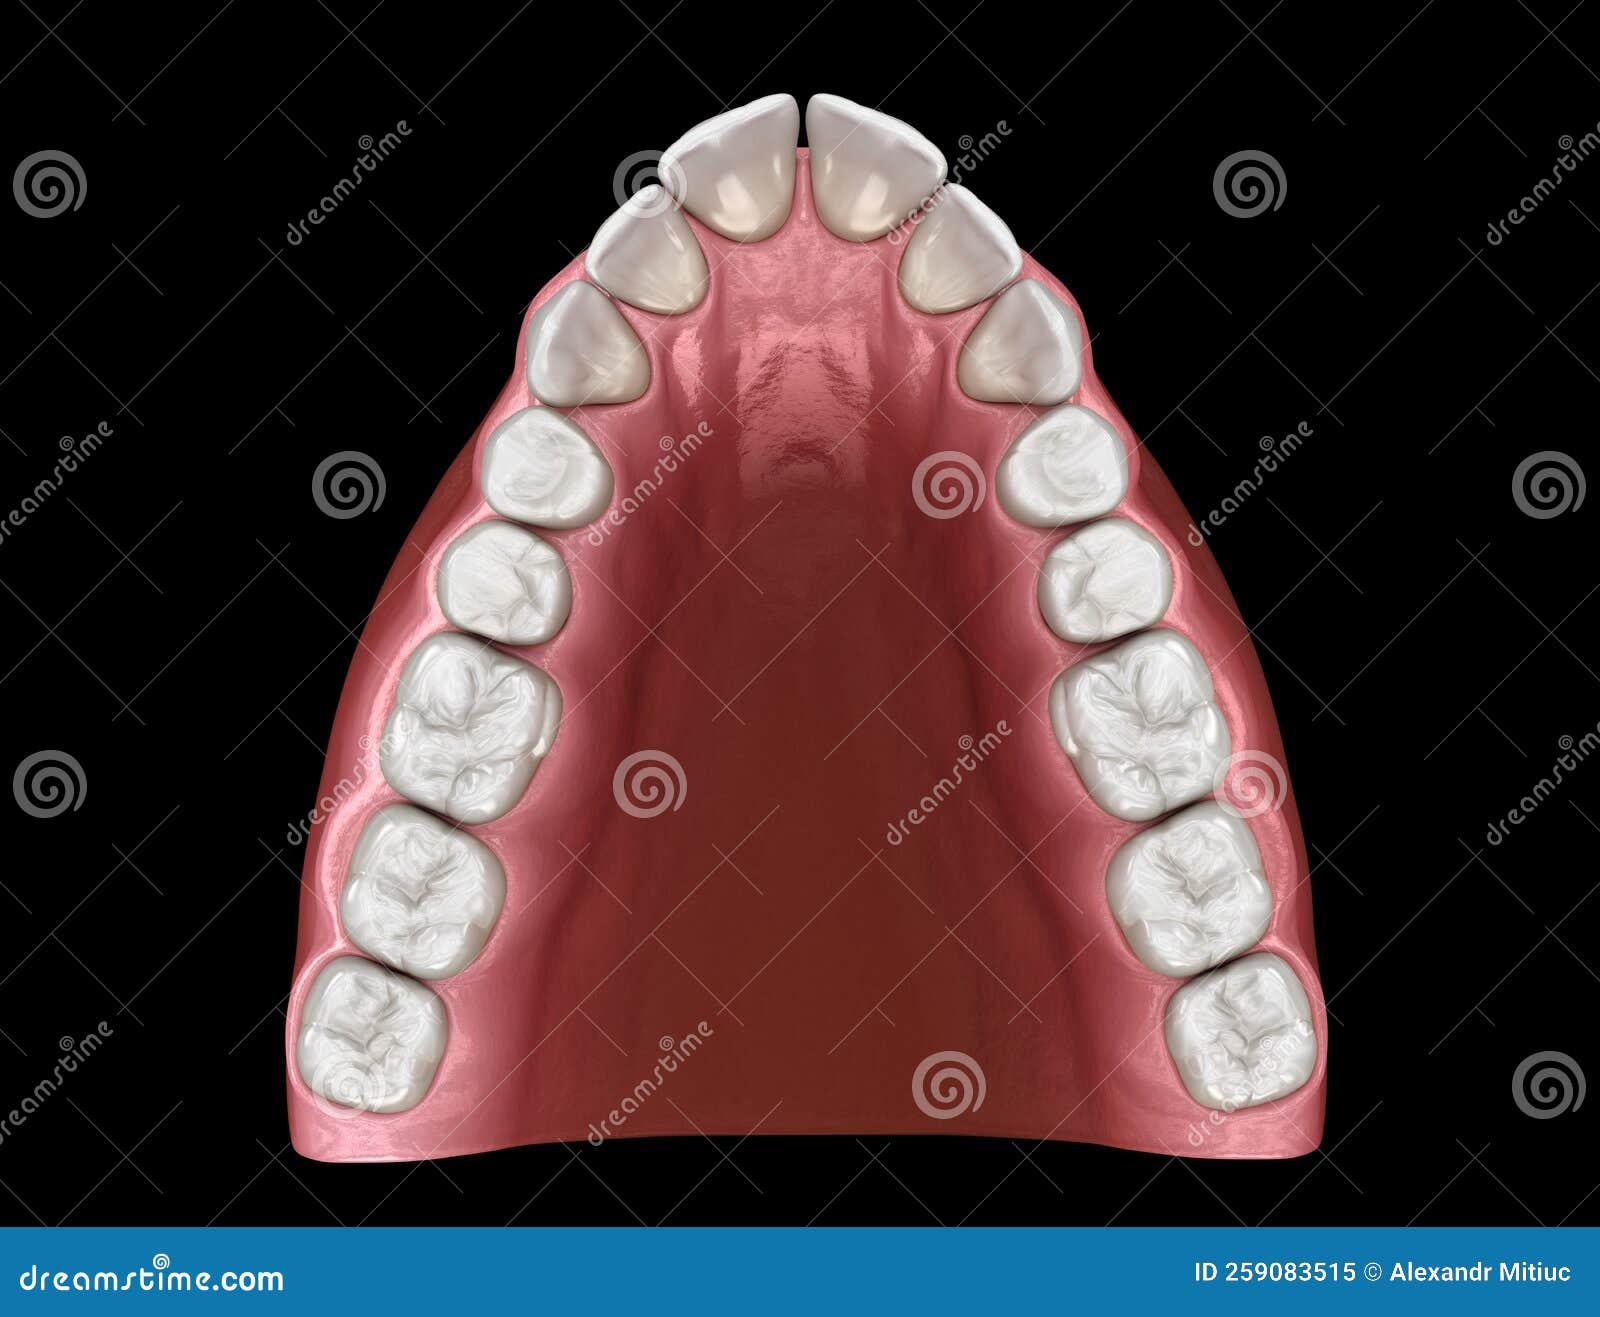 v- tapered arch form of maxilla. medically accurate tooth 3d 